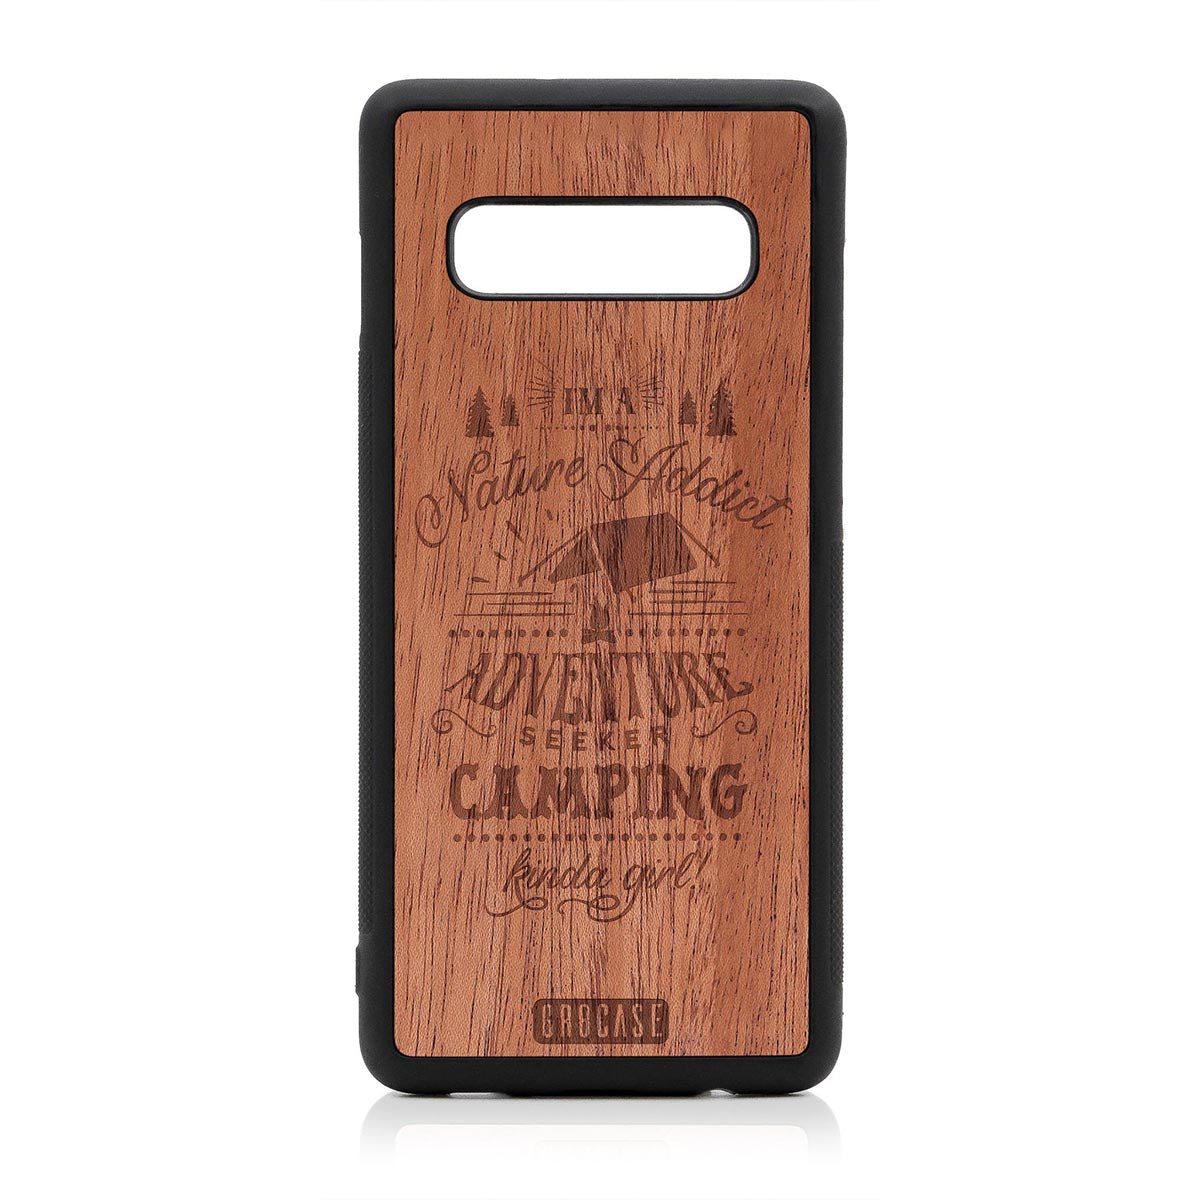 I'm A Nature Addict Adventure Seeker Camping Kinda Girl Design Wood Case Samsung Galaxy S9 Plus by GR8CASE